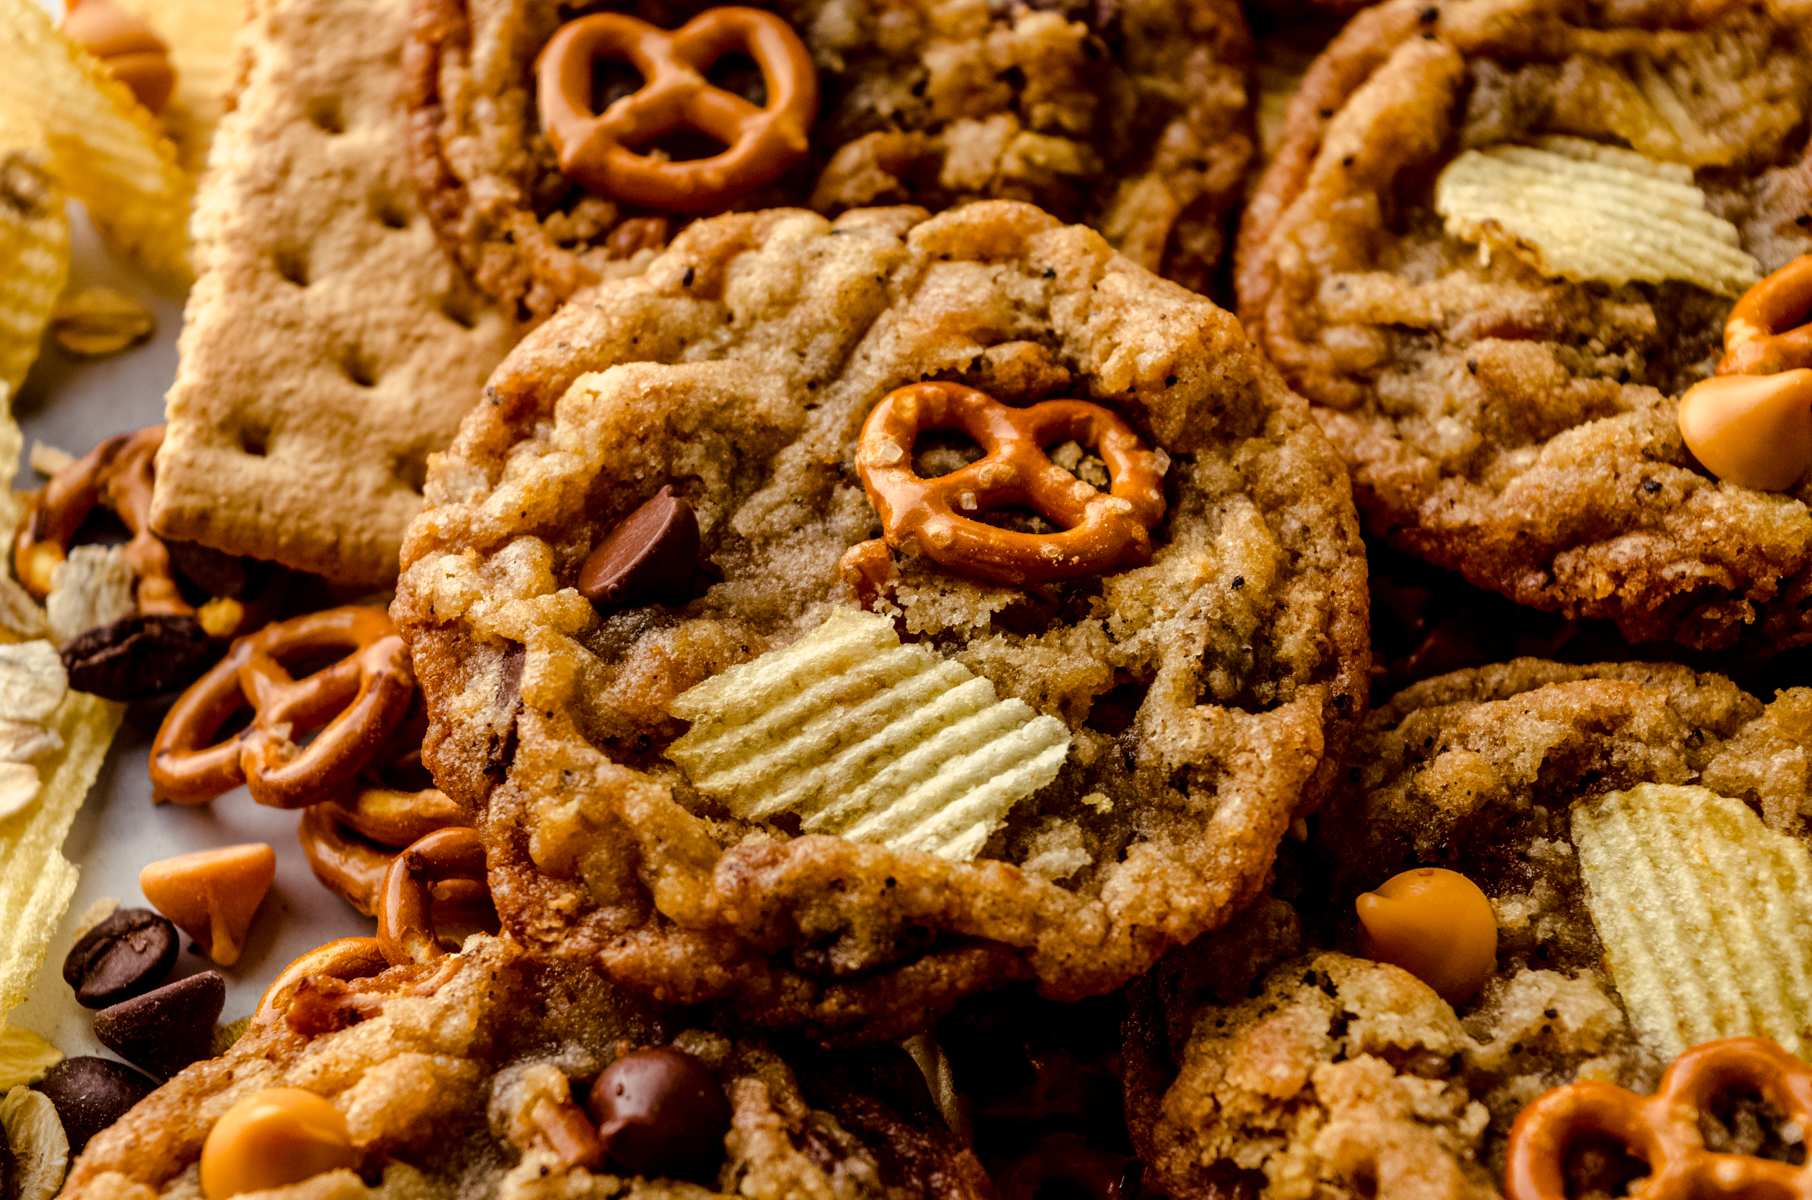 Compost cookies on a surface surrounded by pretzels, chips, and graham cracker pieces.